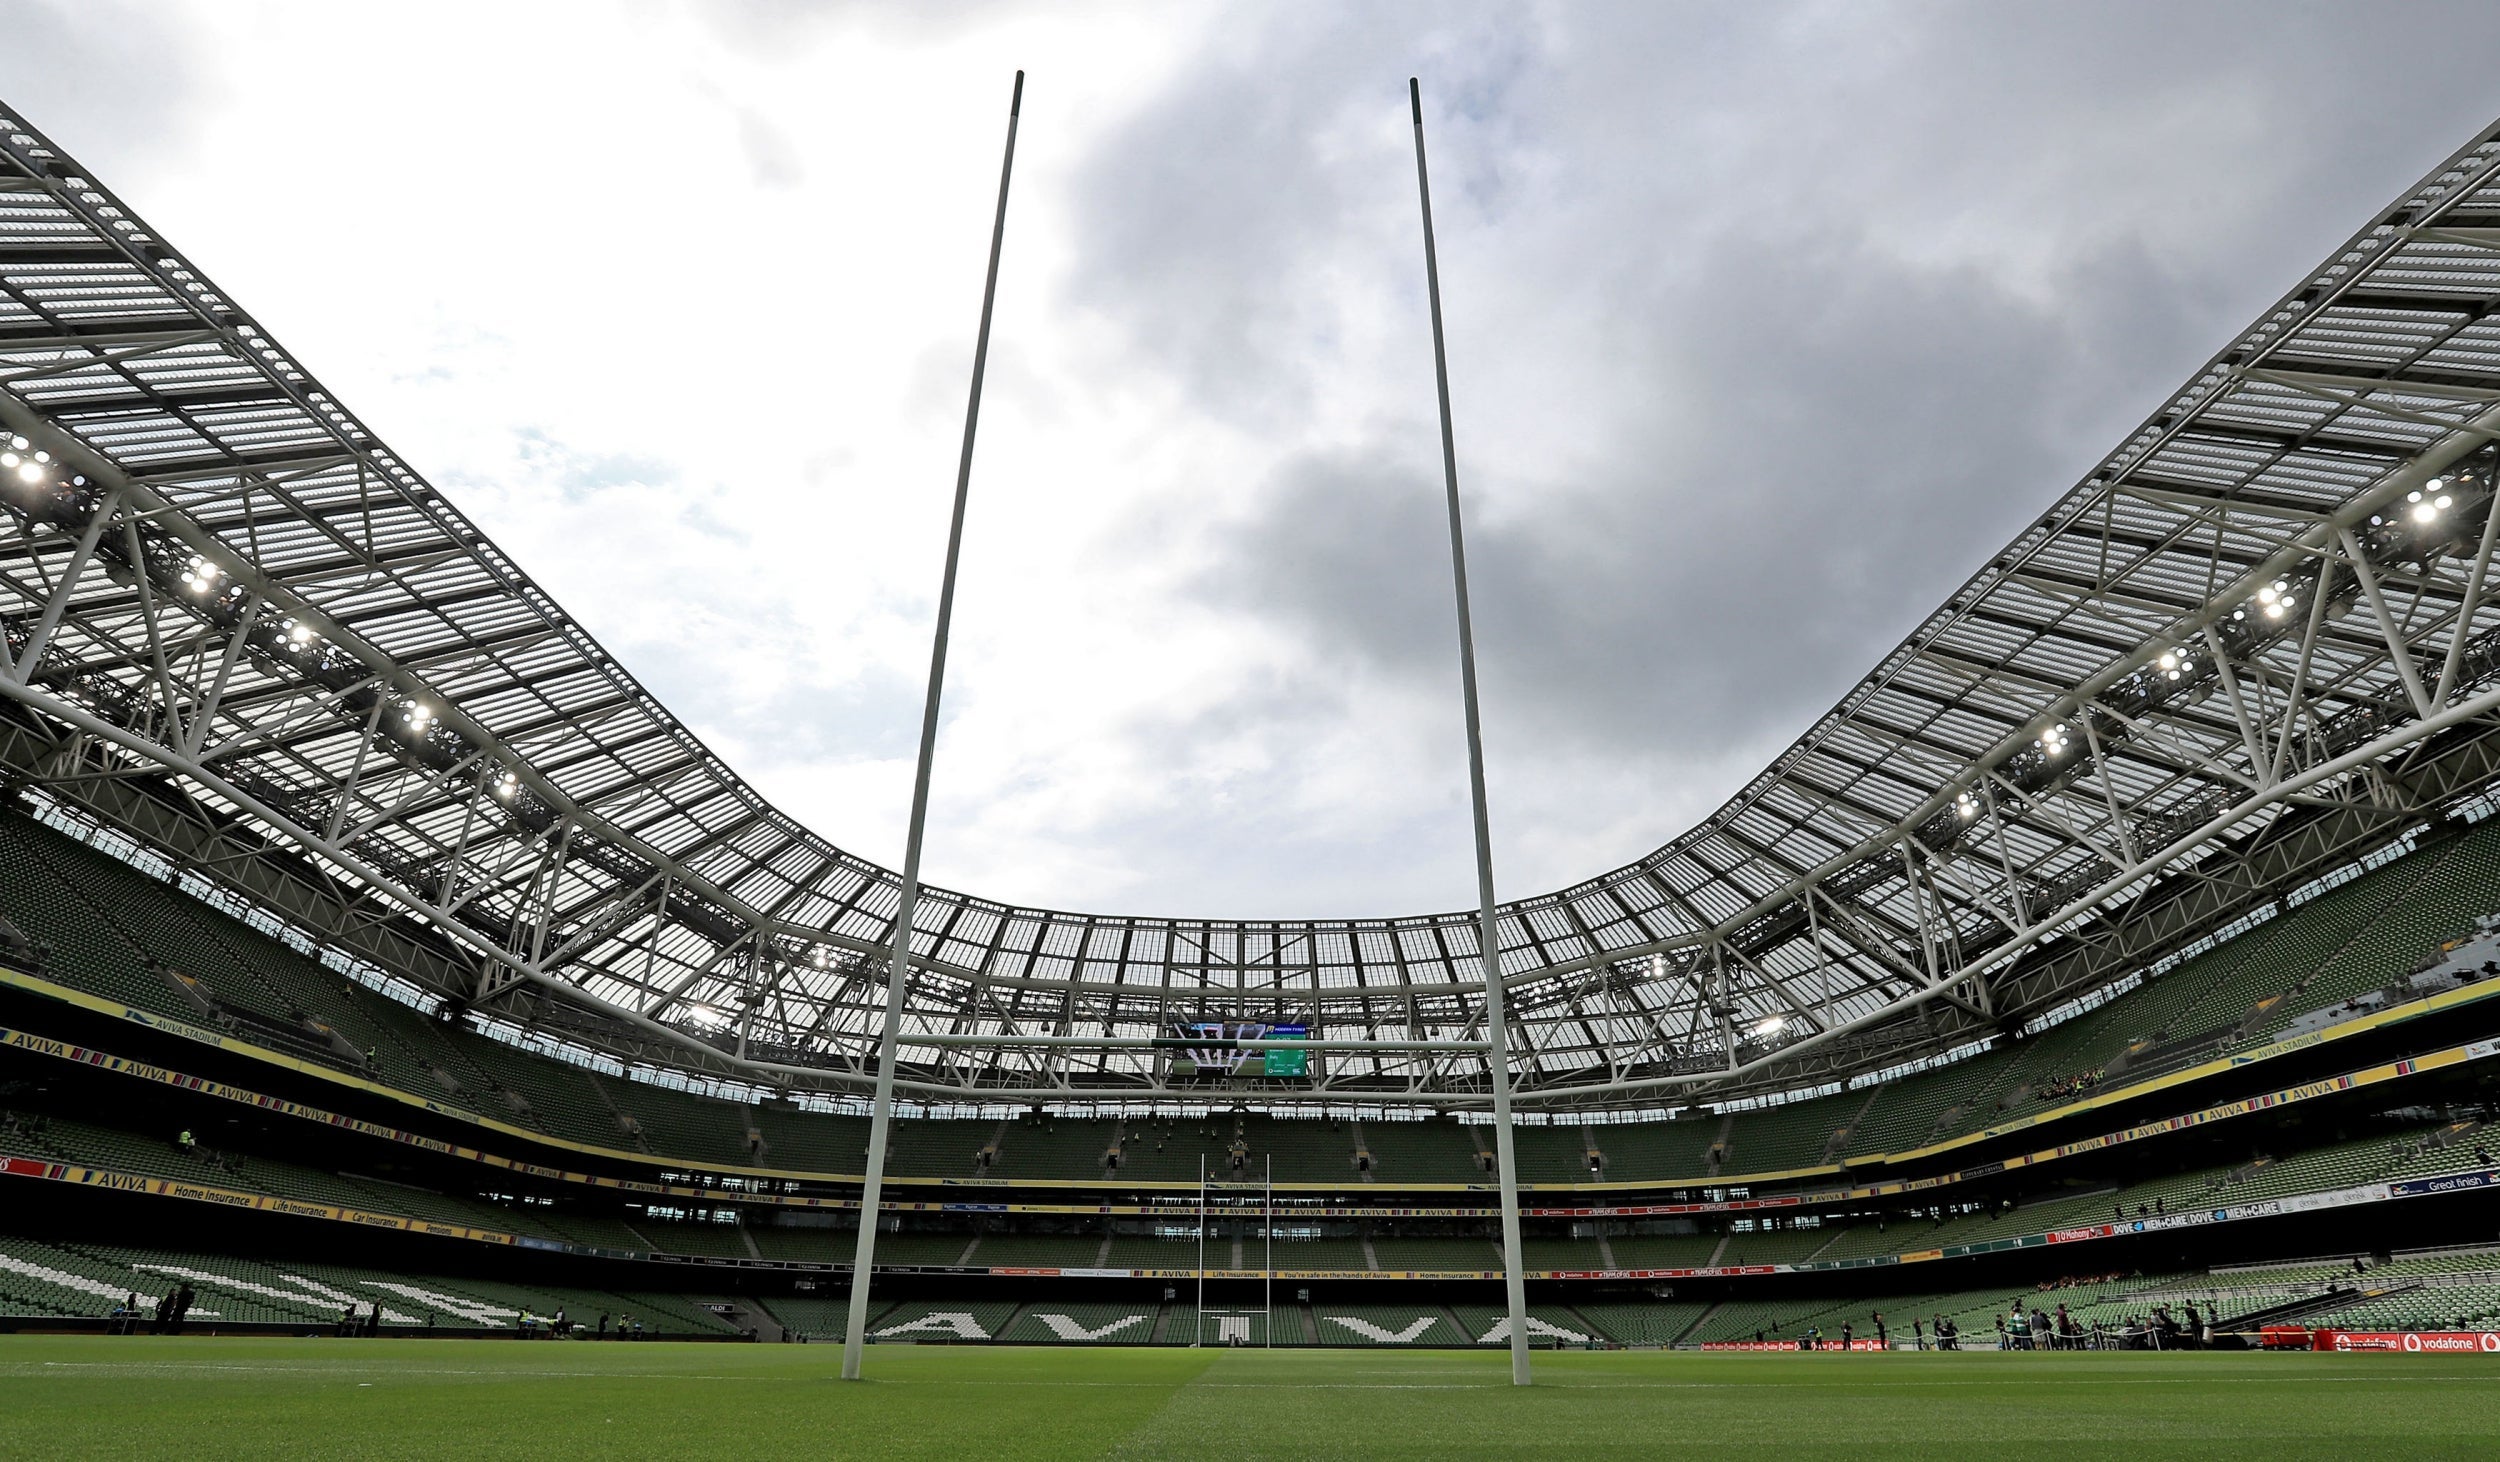 Ireland v Italy Six Nations game has been cancelled due to coronavirus